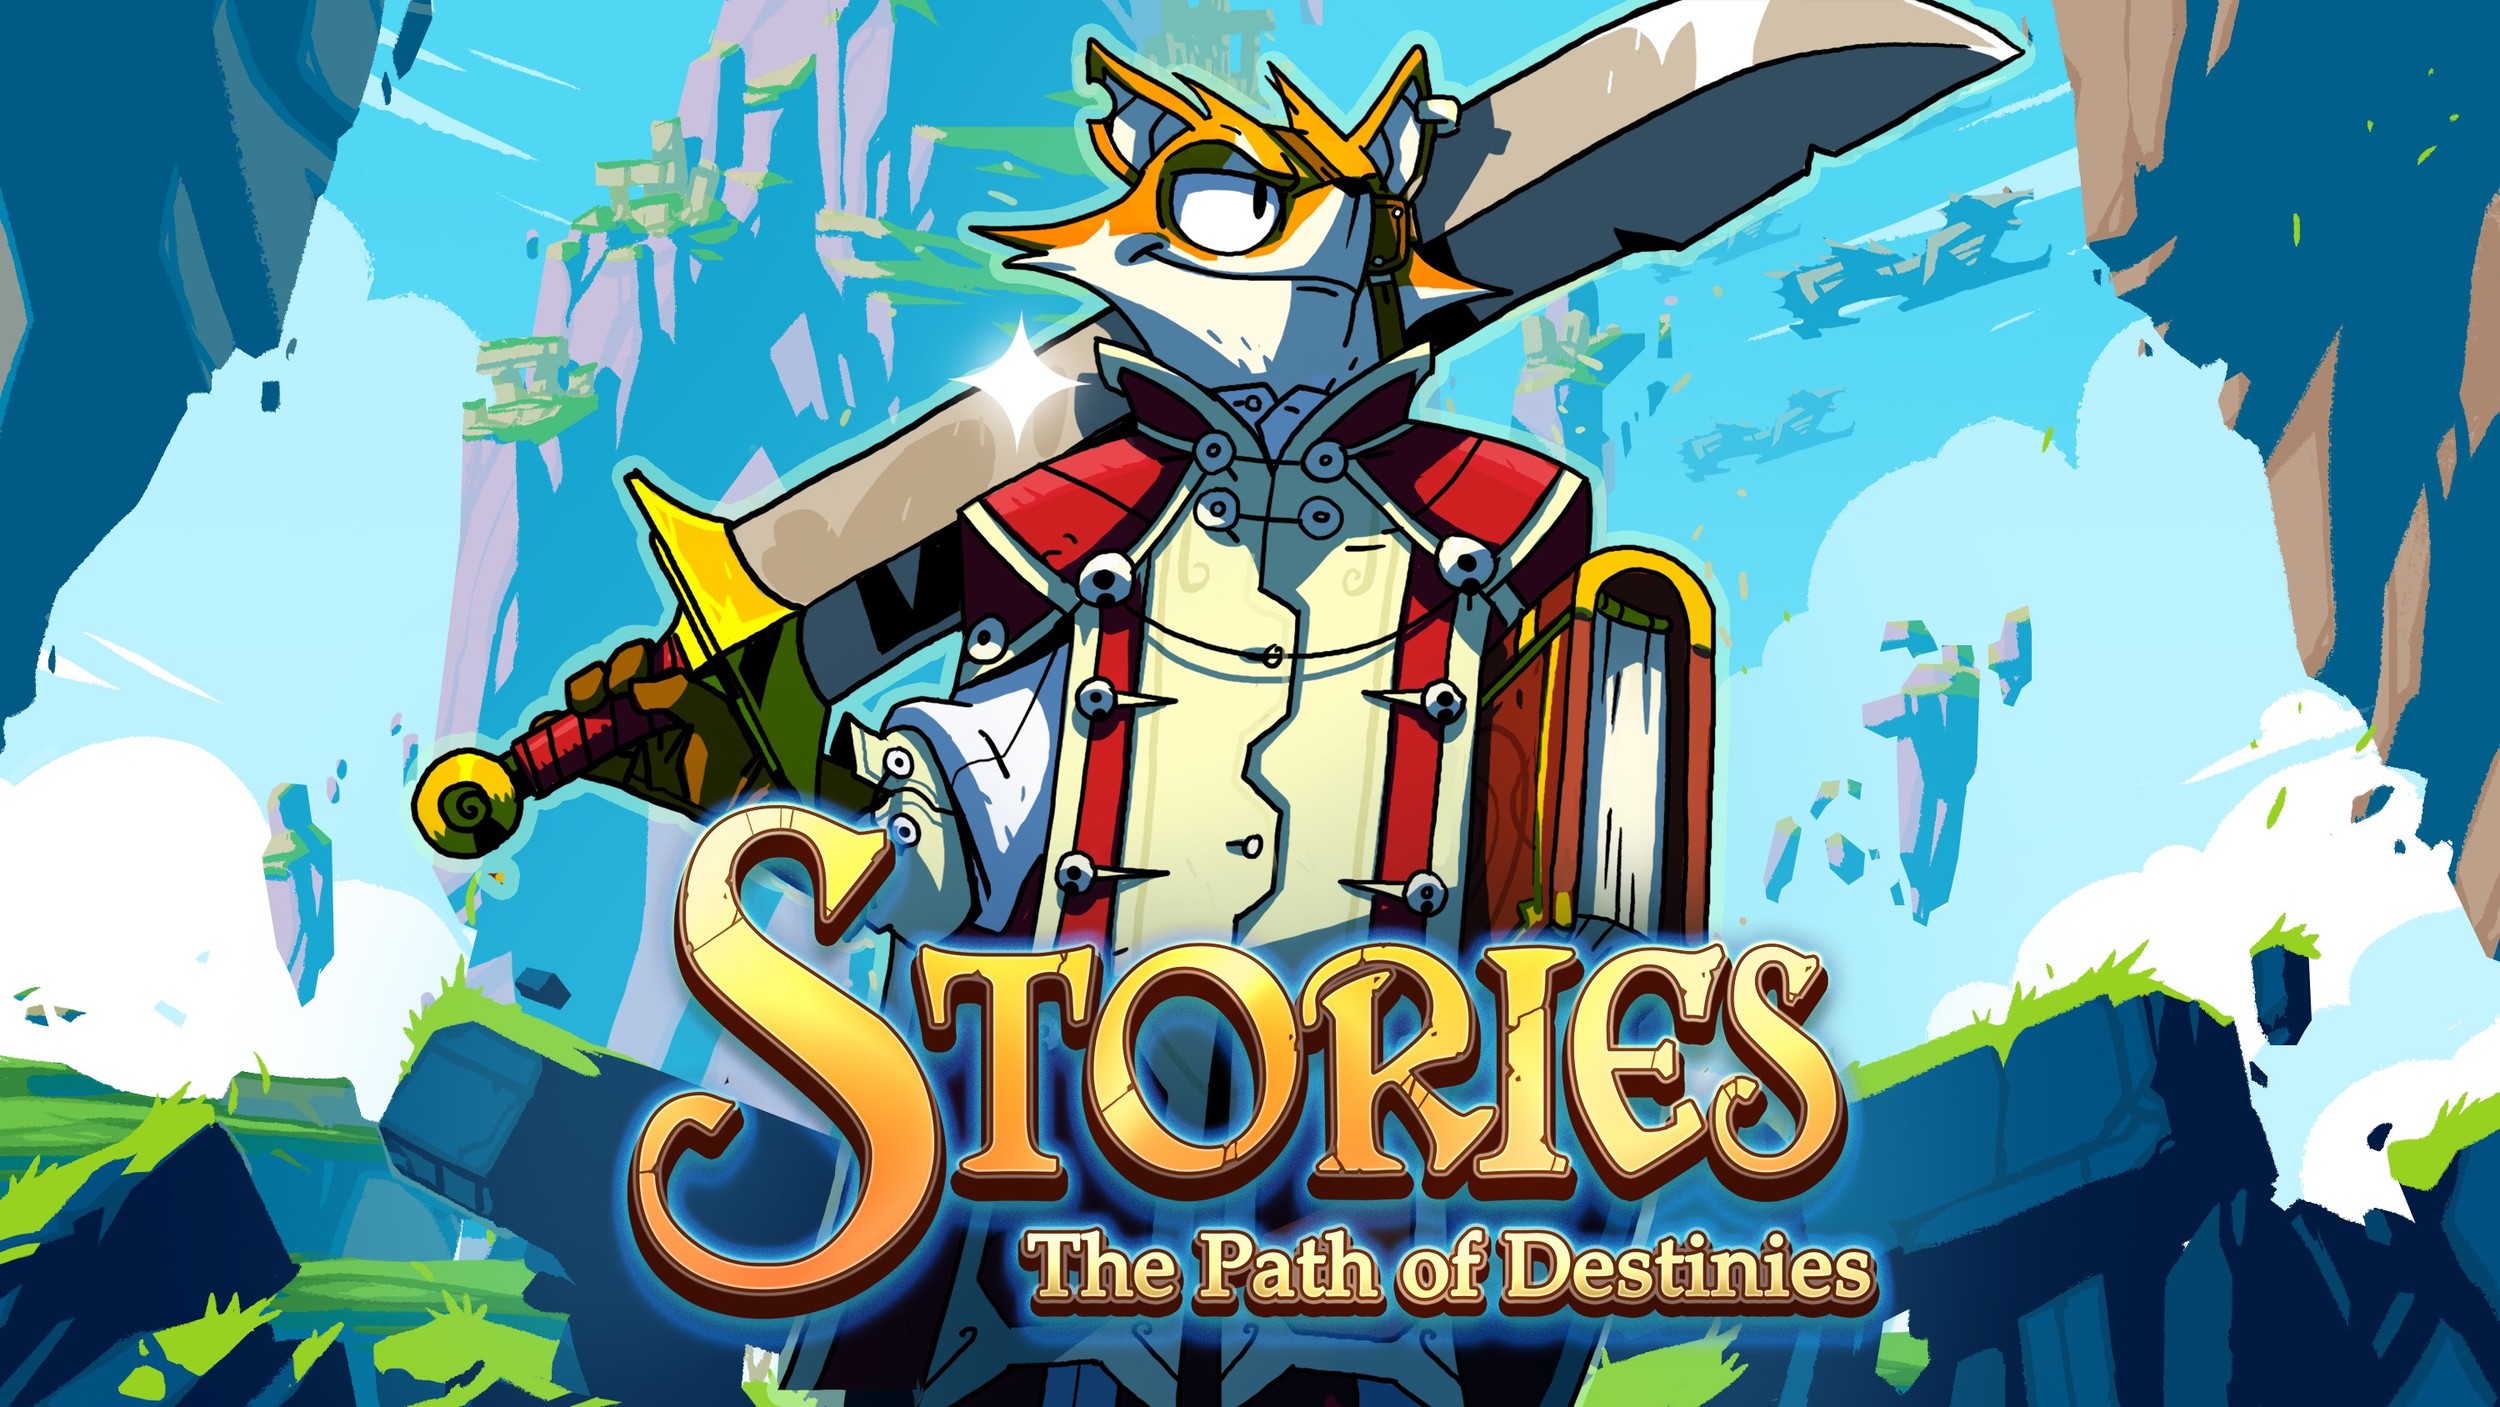 Furry Sky-Pirate RPG Stories: The Path of Destinies Launches April 12